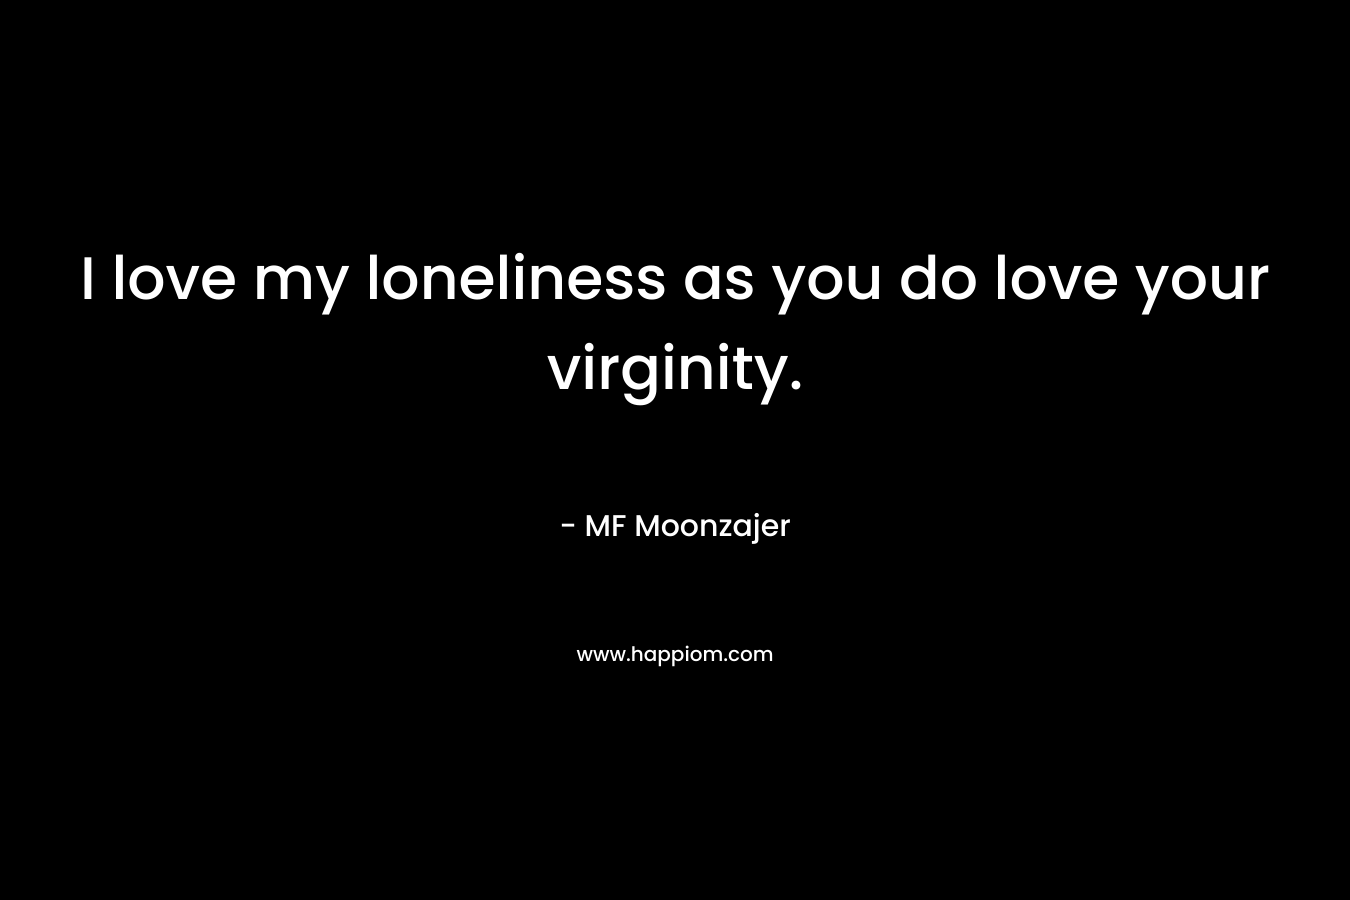 I love my loneliness as you do love your virginity.